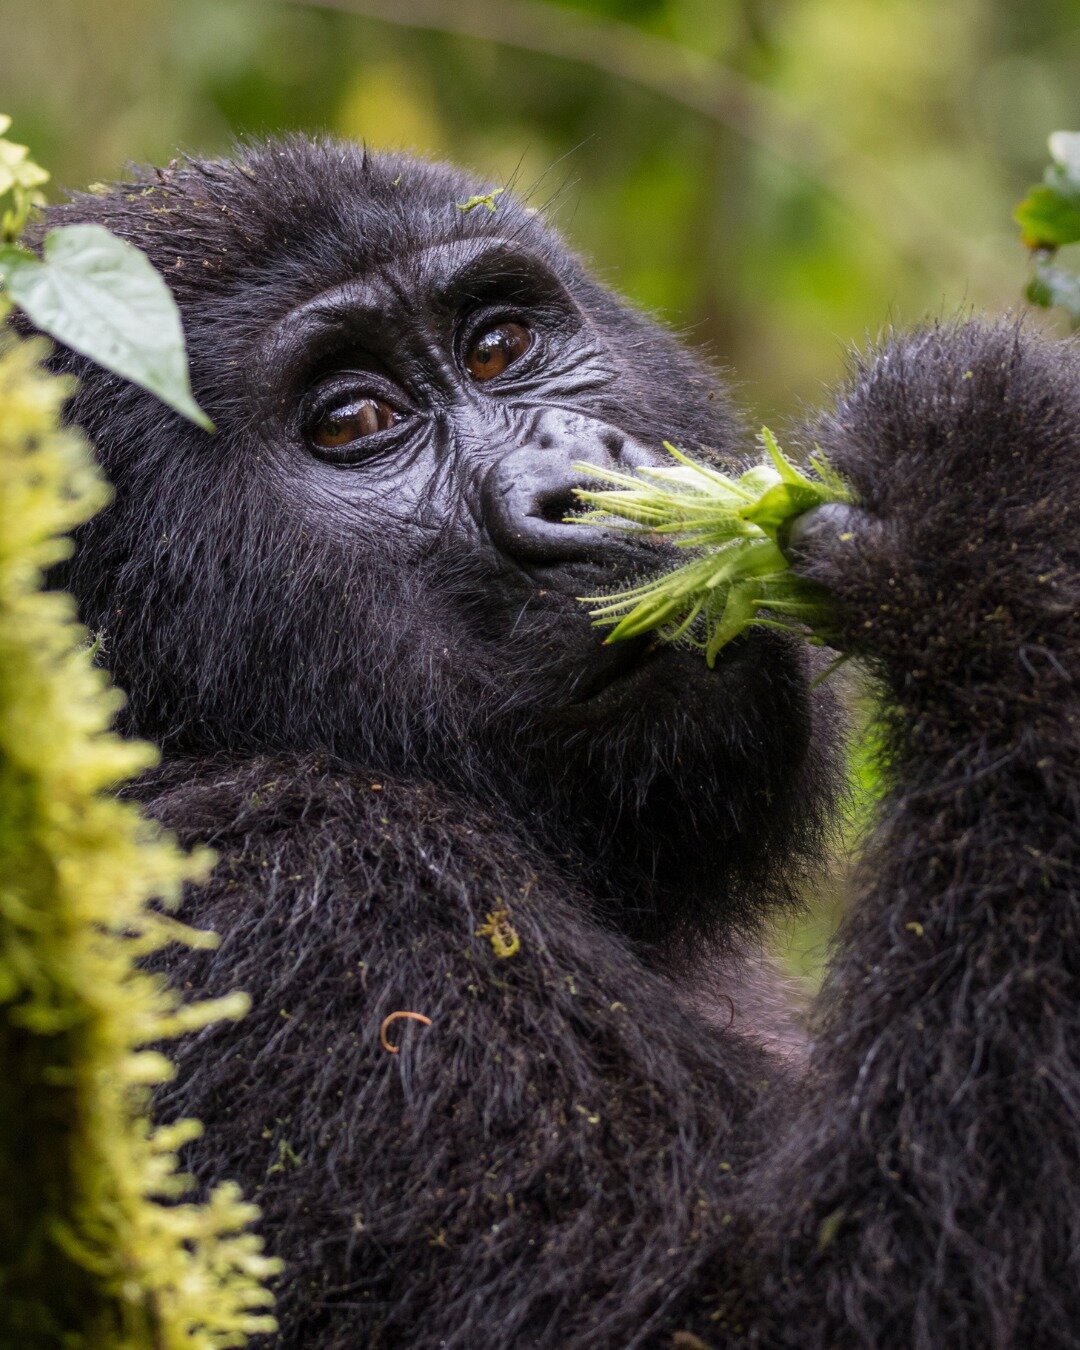 A once in a life time trip to see gorillas in Uganda! 

We can help you with this - contact us today!

#conservationmatterstravel #conservationmatters #travel #travelafrica #safari #conservation #wildlife #big5 #kenya #holiday #gapyear #beach #marine